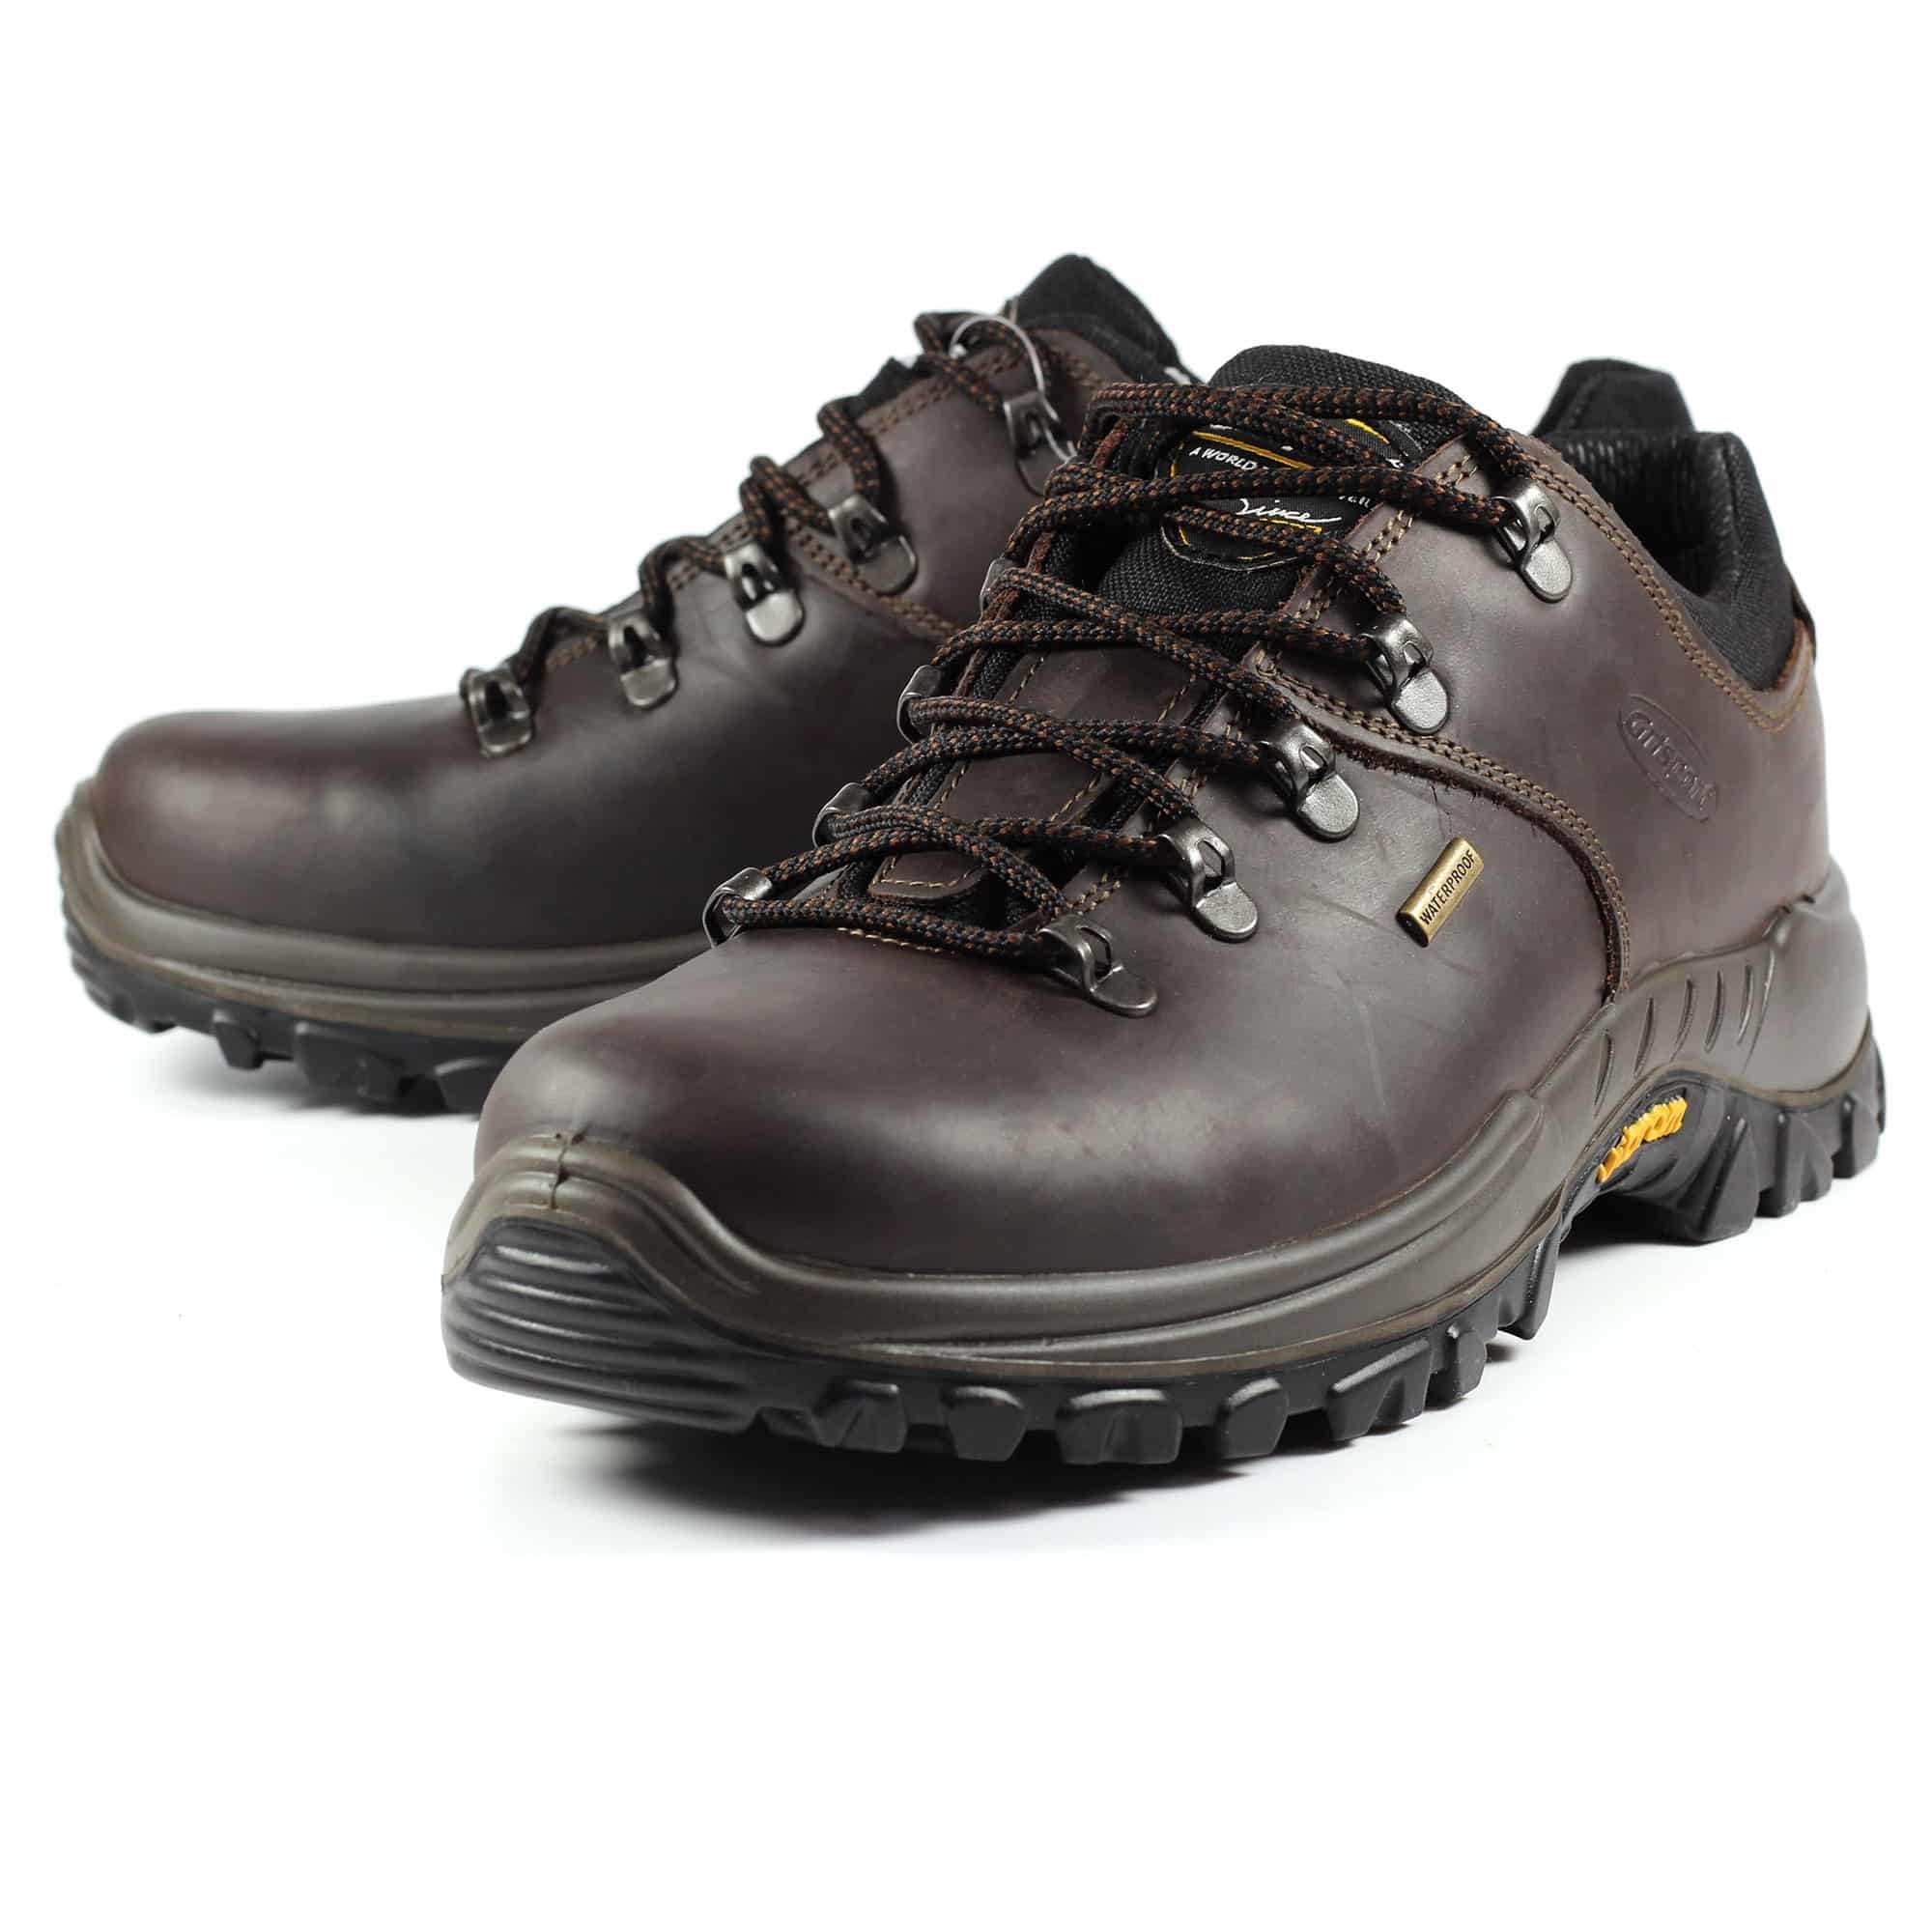 photo of grisport dartmoor leather walking shoes brown